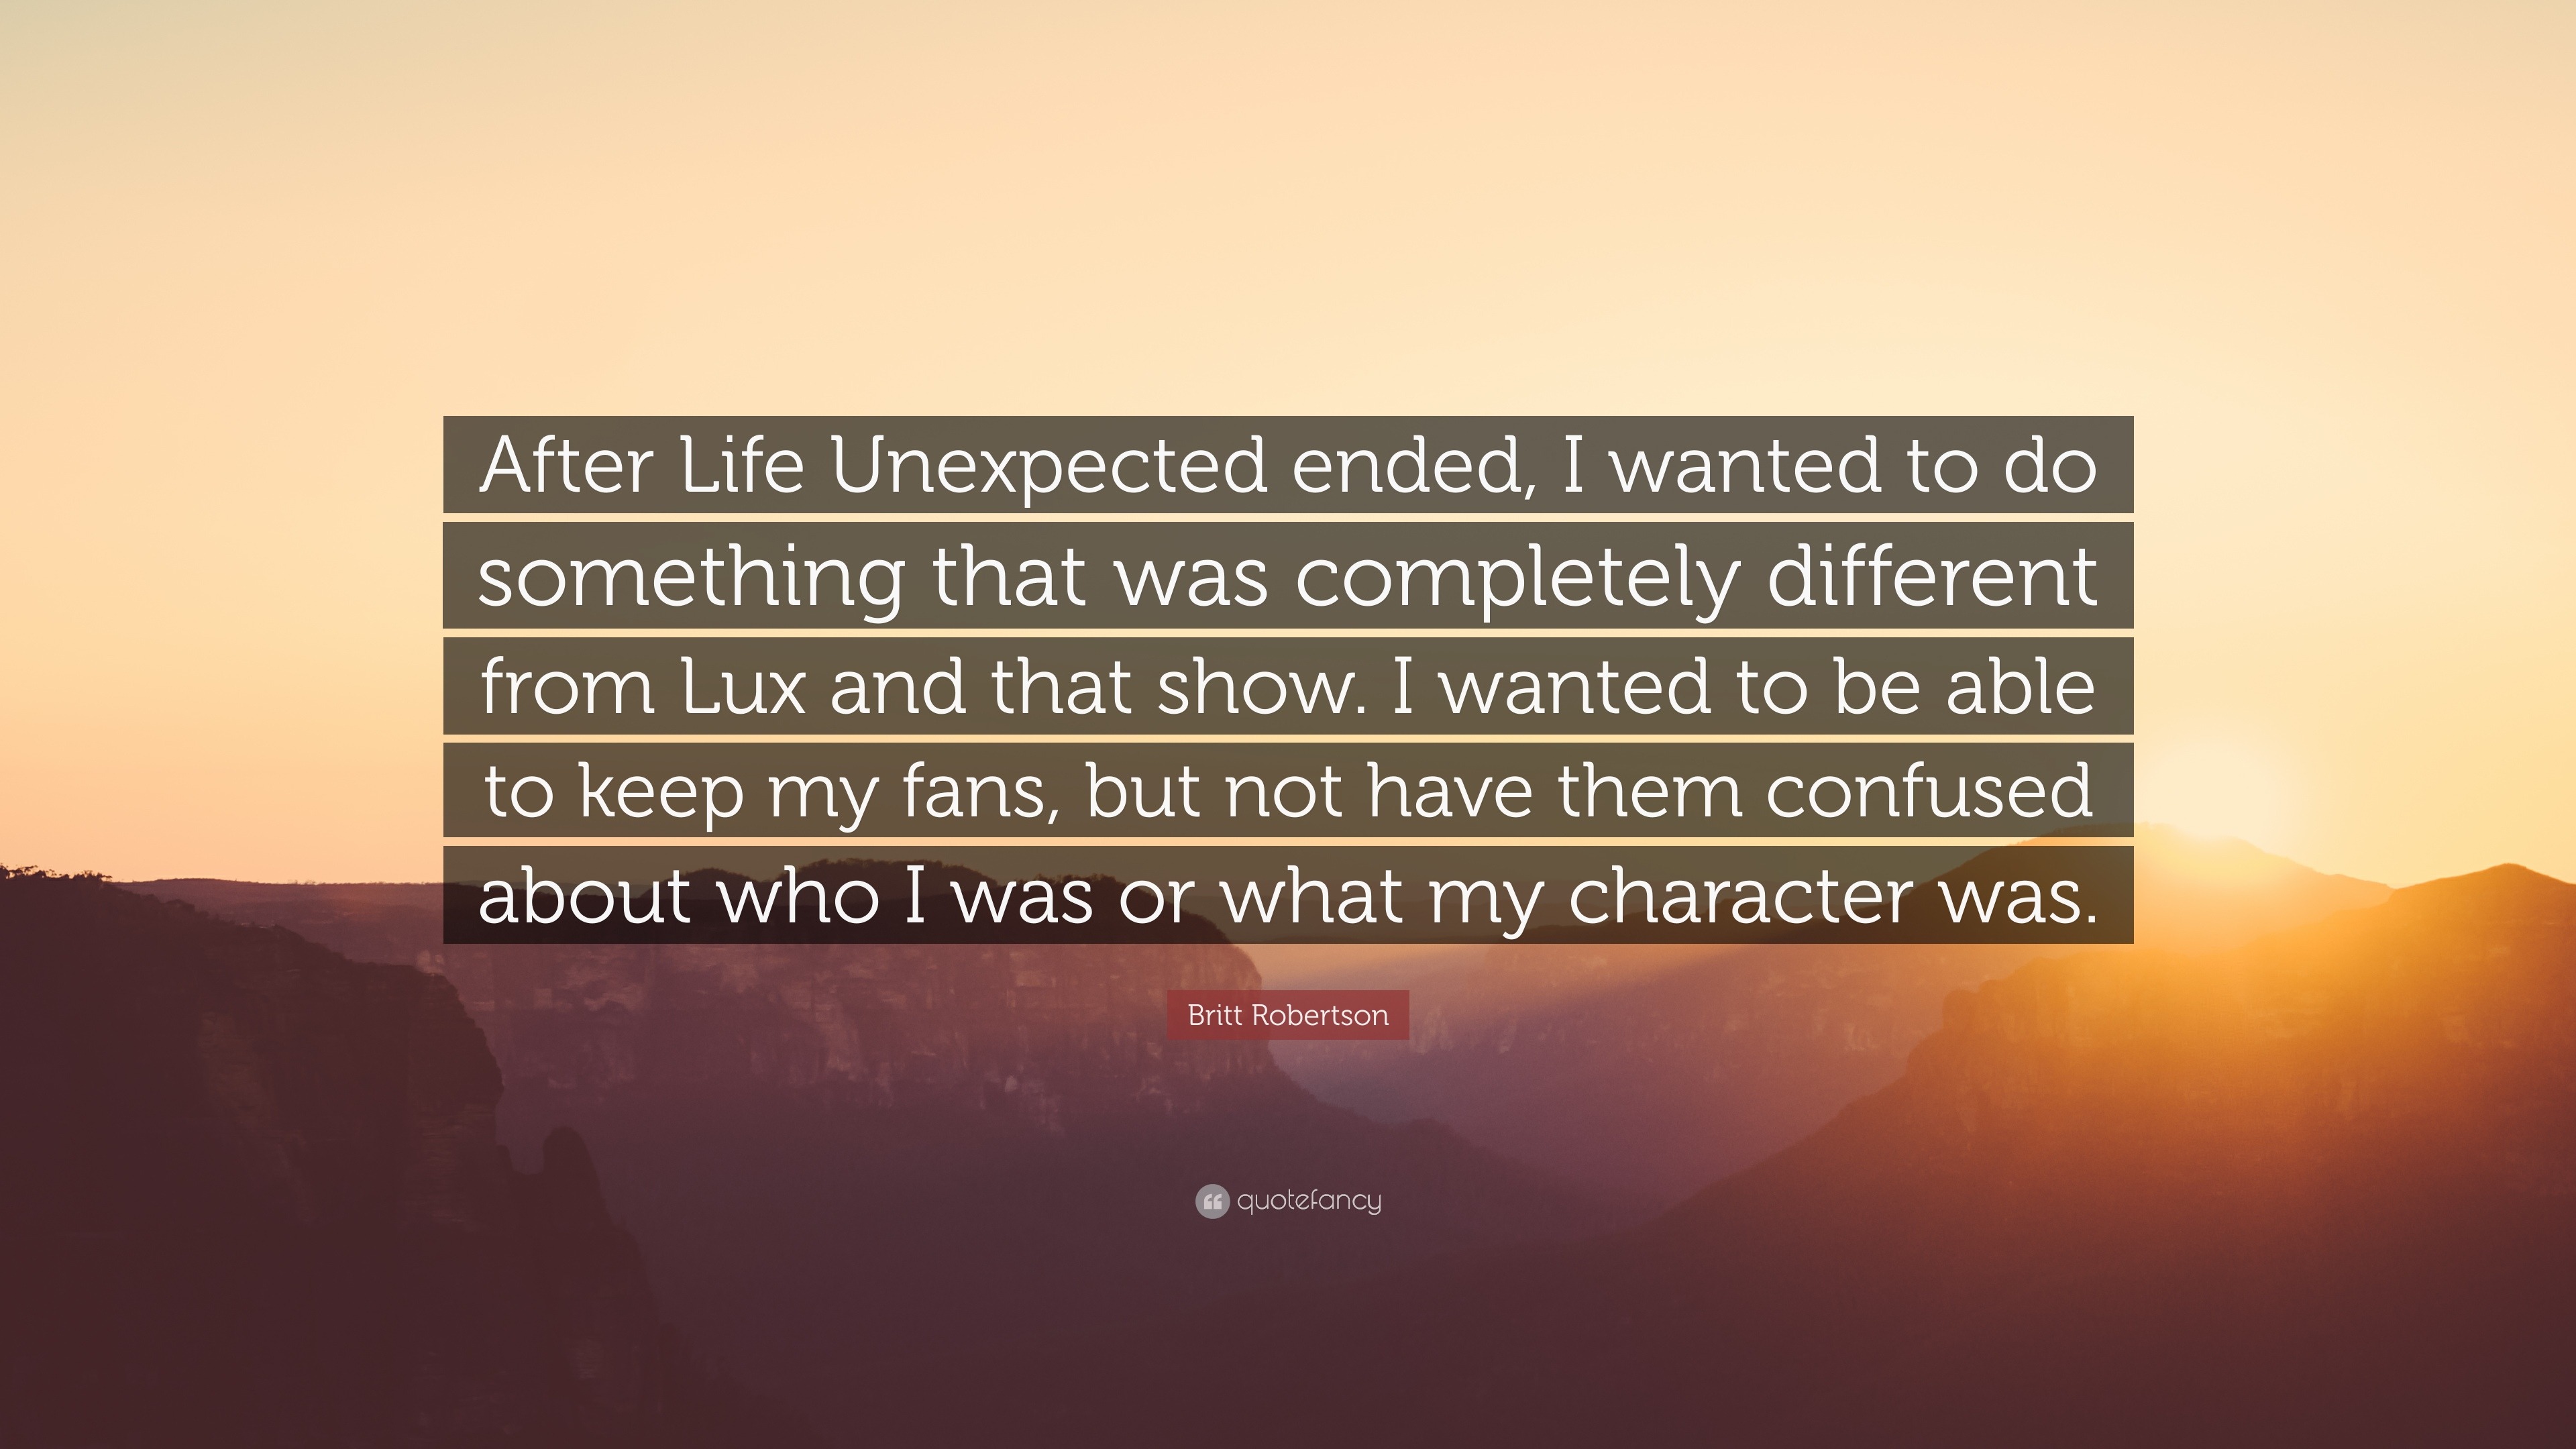 Britt Robertson Quote After Life Unexpected Ended I Wanted To Do Something That Was Completely Different From Lux And That Show I Wanted To